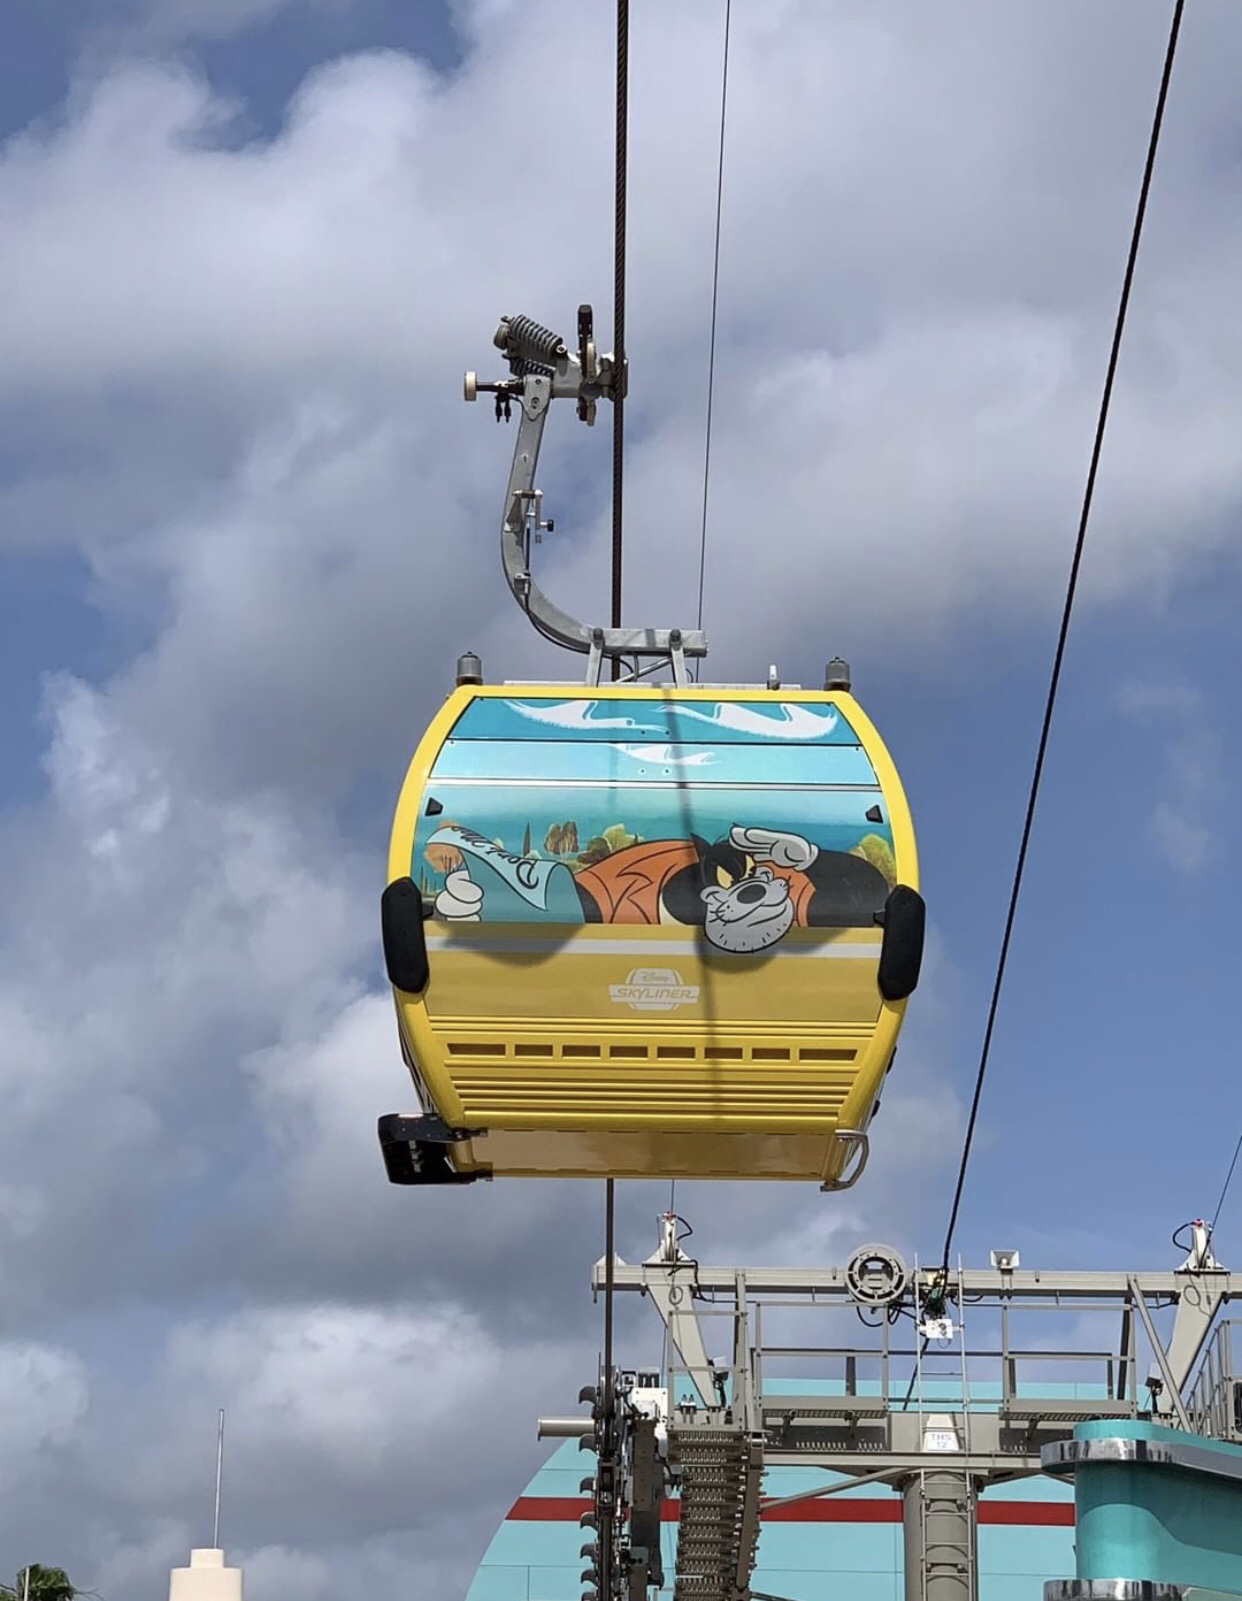 Disney's Skyliner Gondola's Have Been Uncovered at Disney's Hollywood Studios